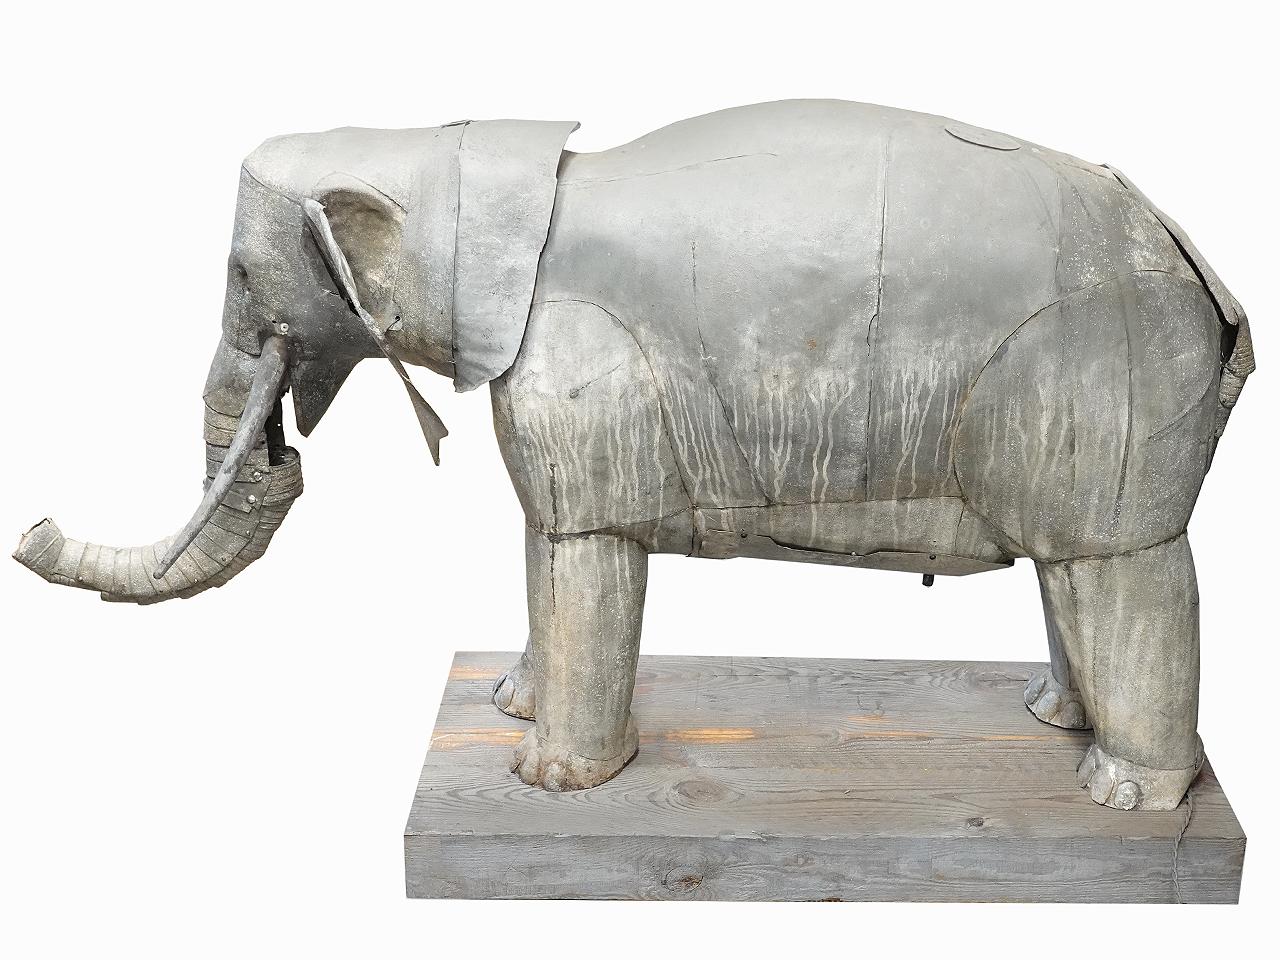 Large Mid 1800s Zinc Automaton Elephant  In Distressed Condition For Sale In Peekskill, NY